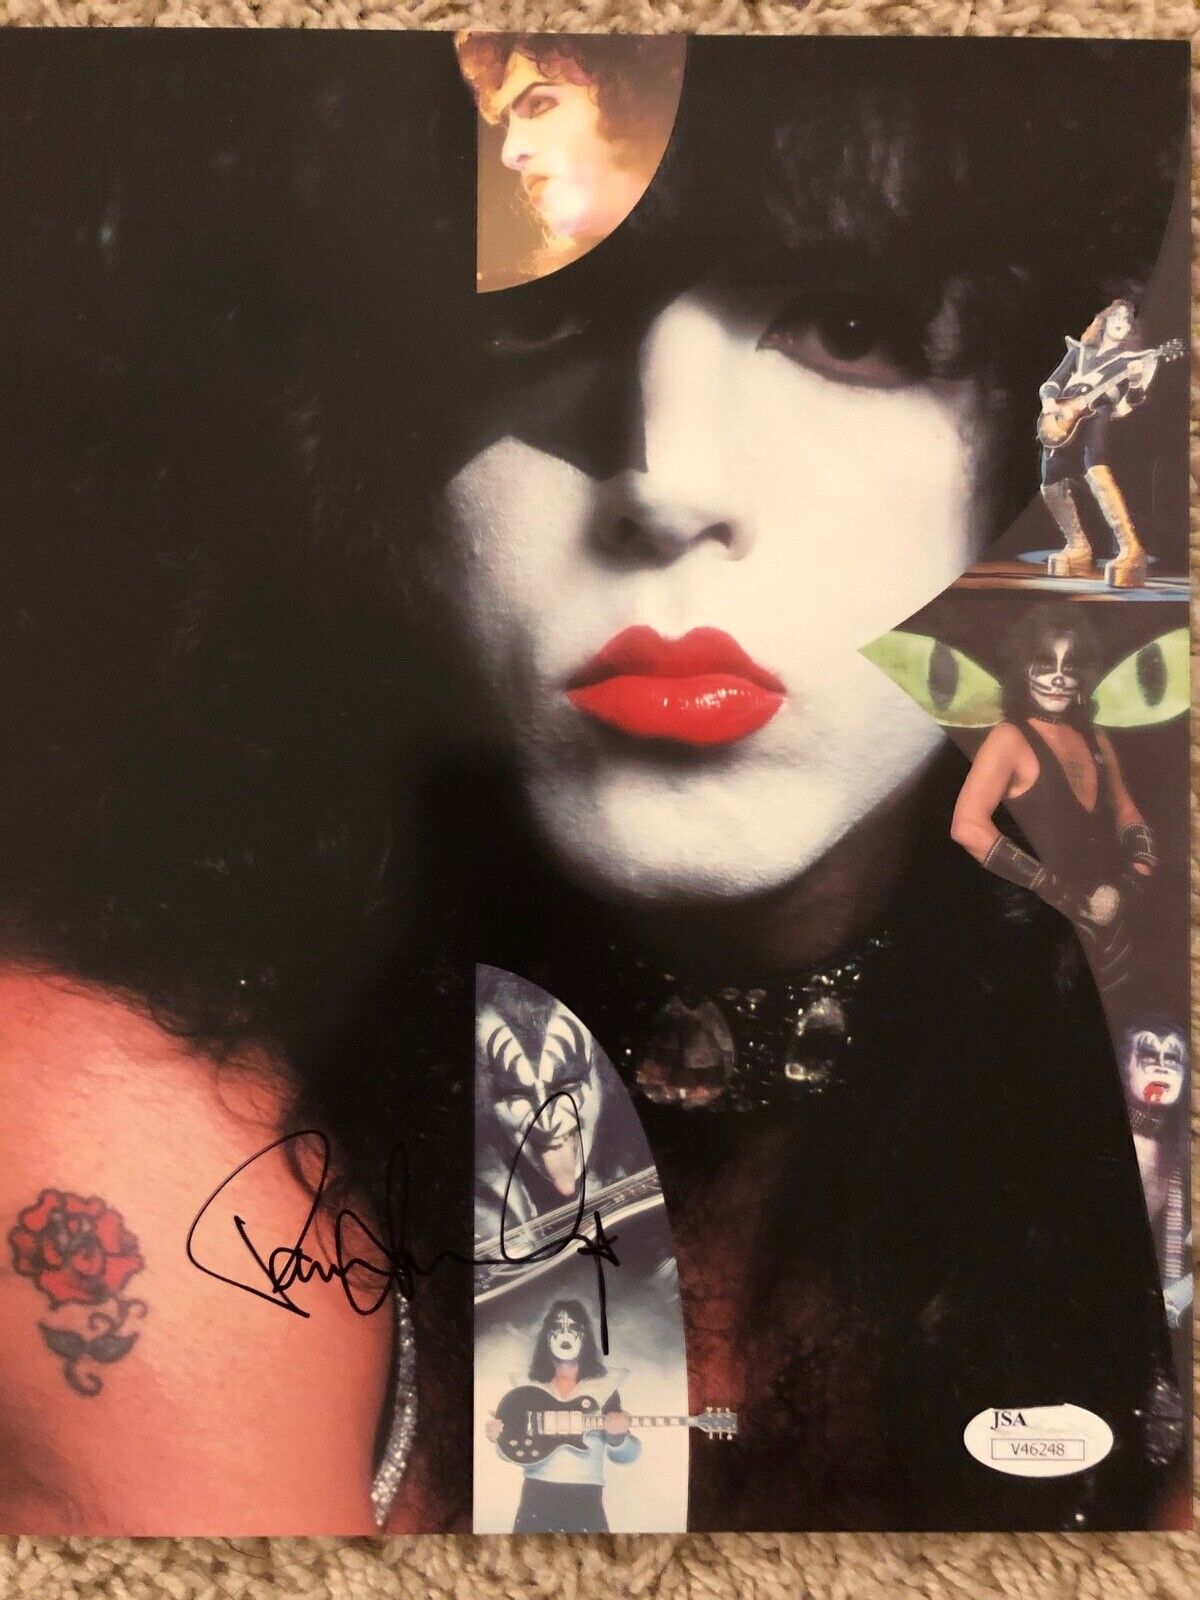 KISS individual photo signed by Gene Simmons and Paul Stanle (4 pictures) JSA Без бренда - фотография #4